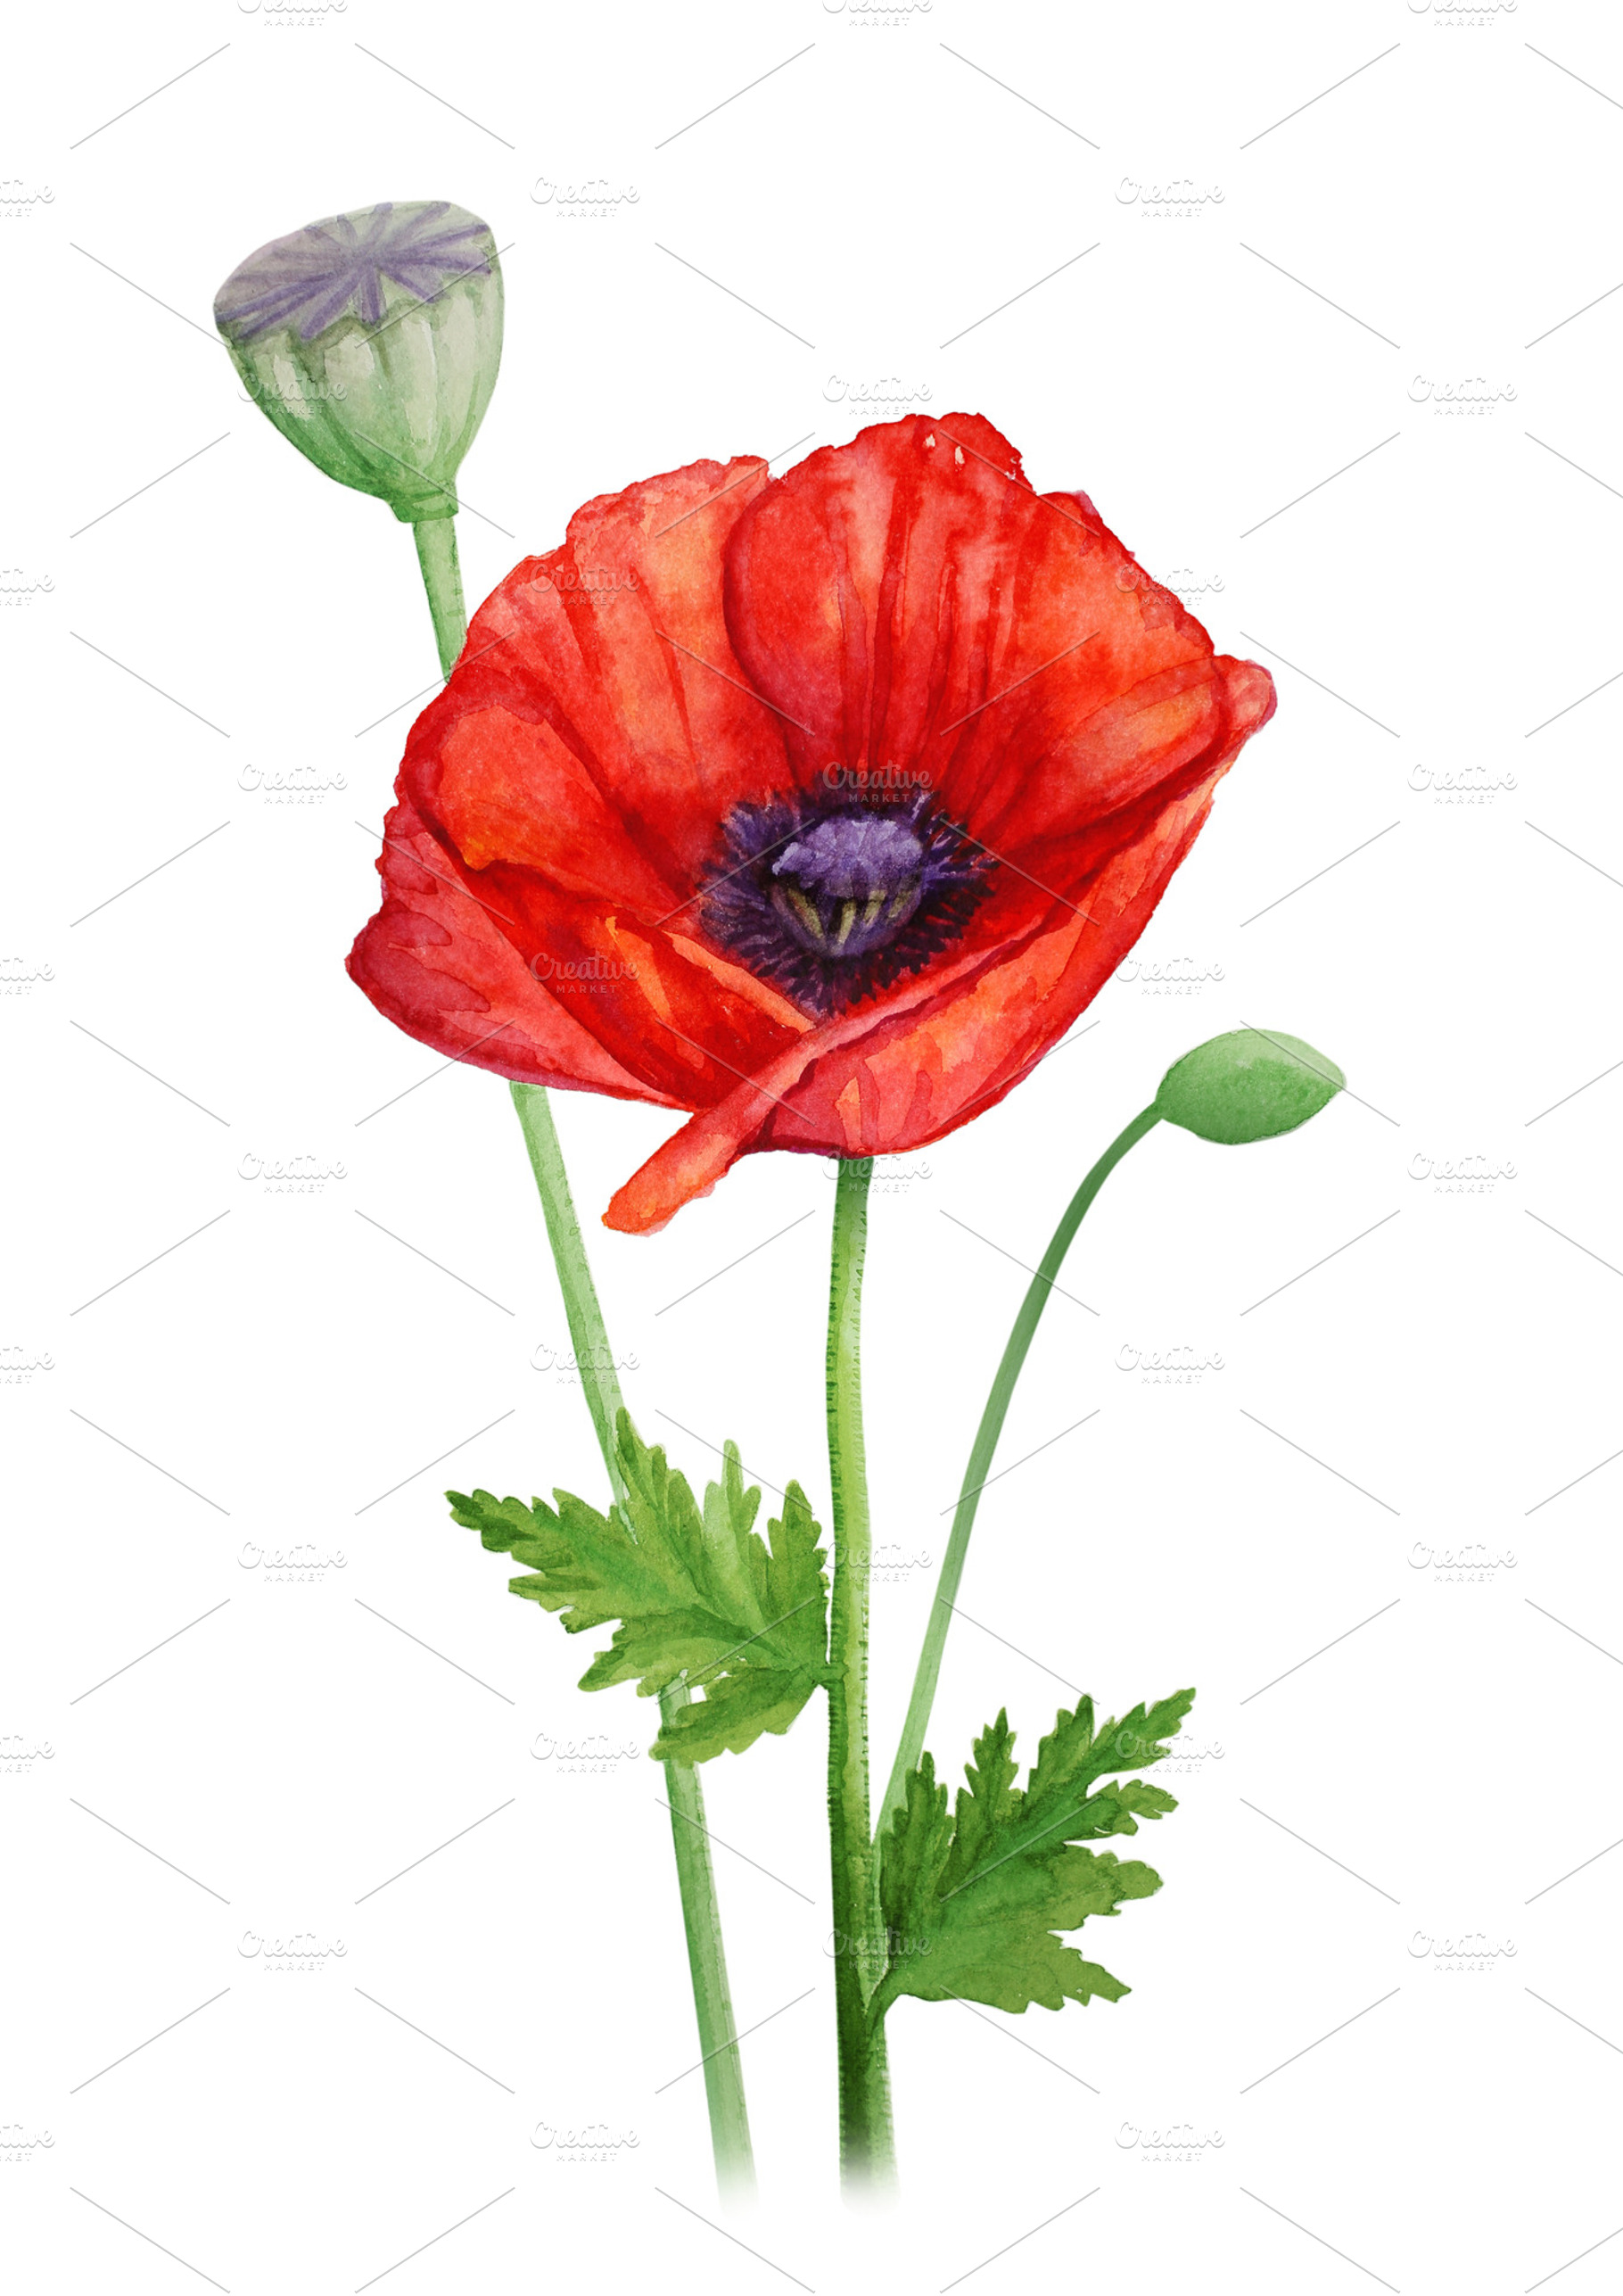 Red poppy flower on a stalk - watercolor illustration | High-Quality ...